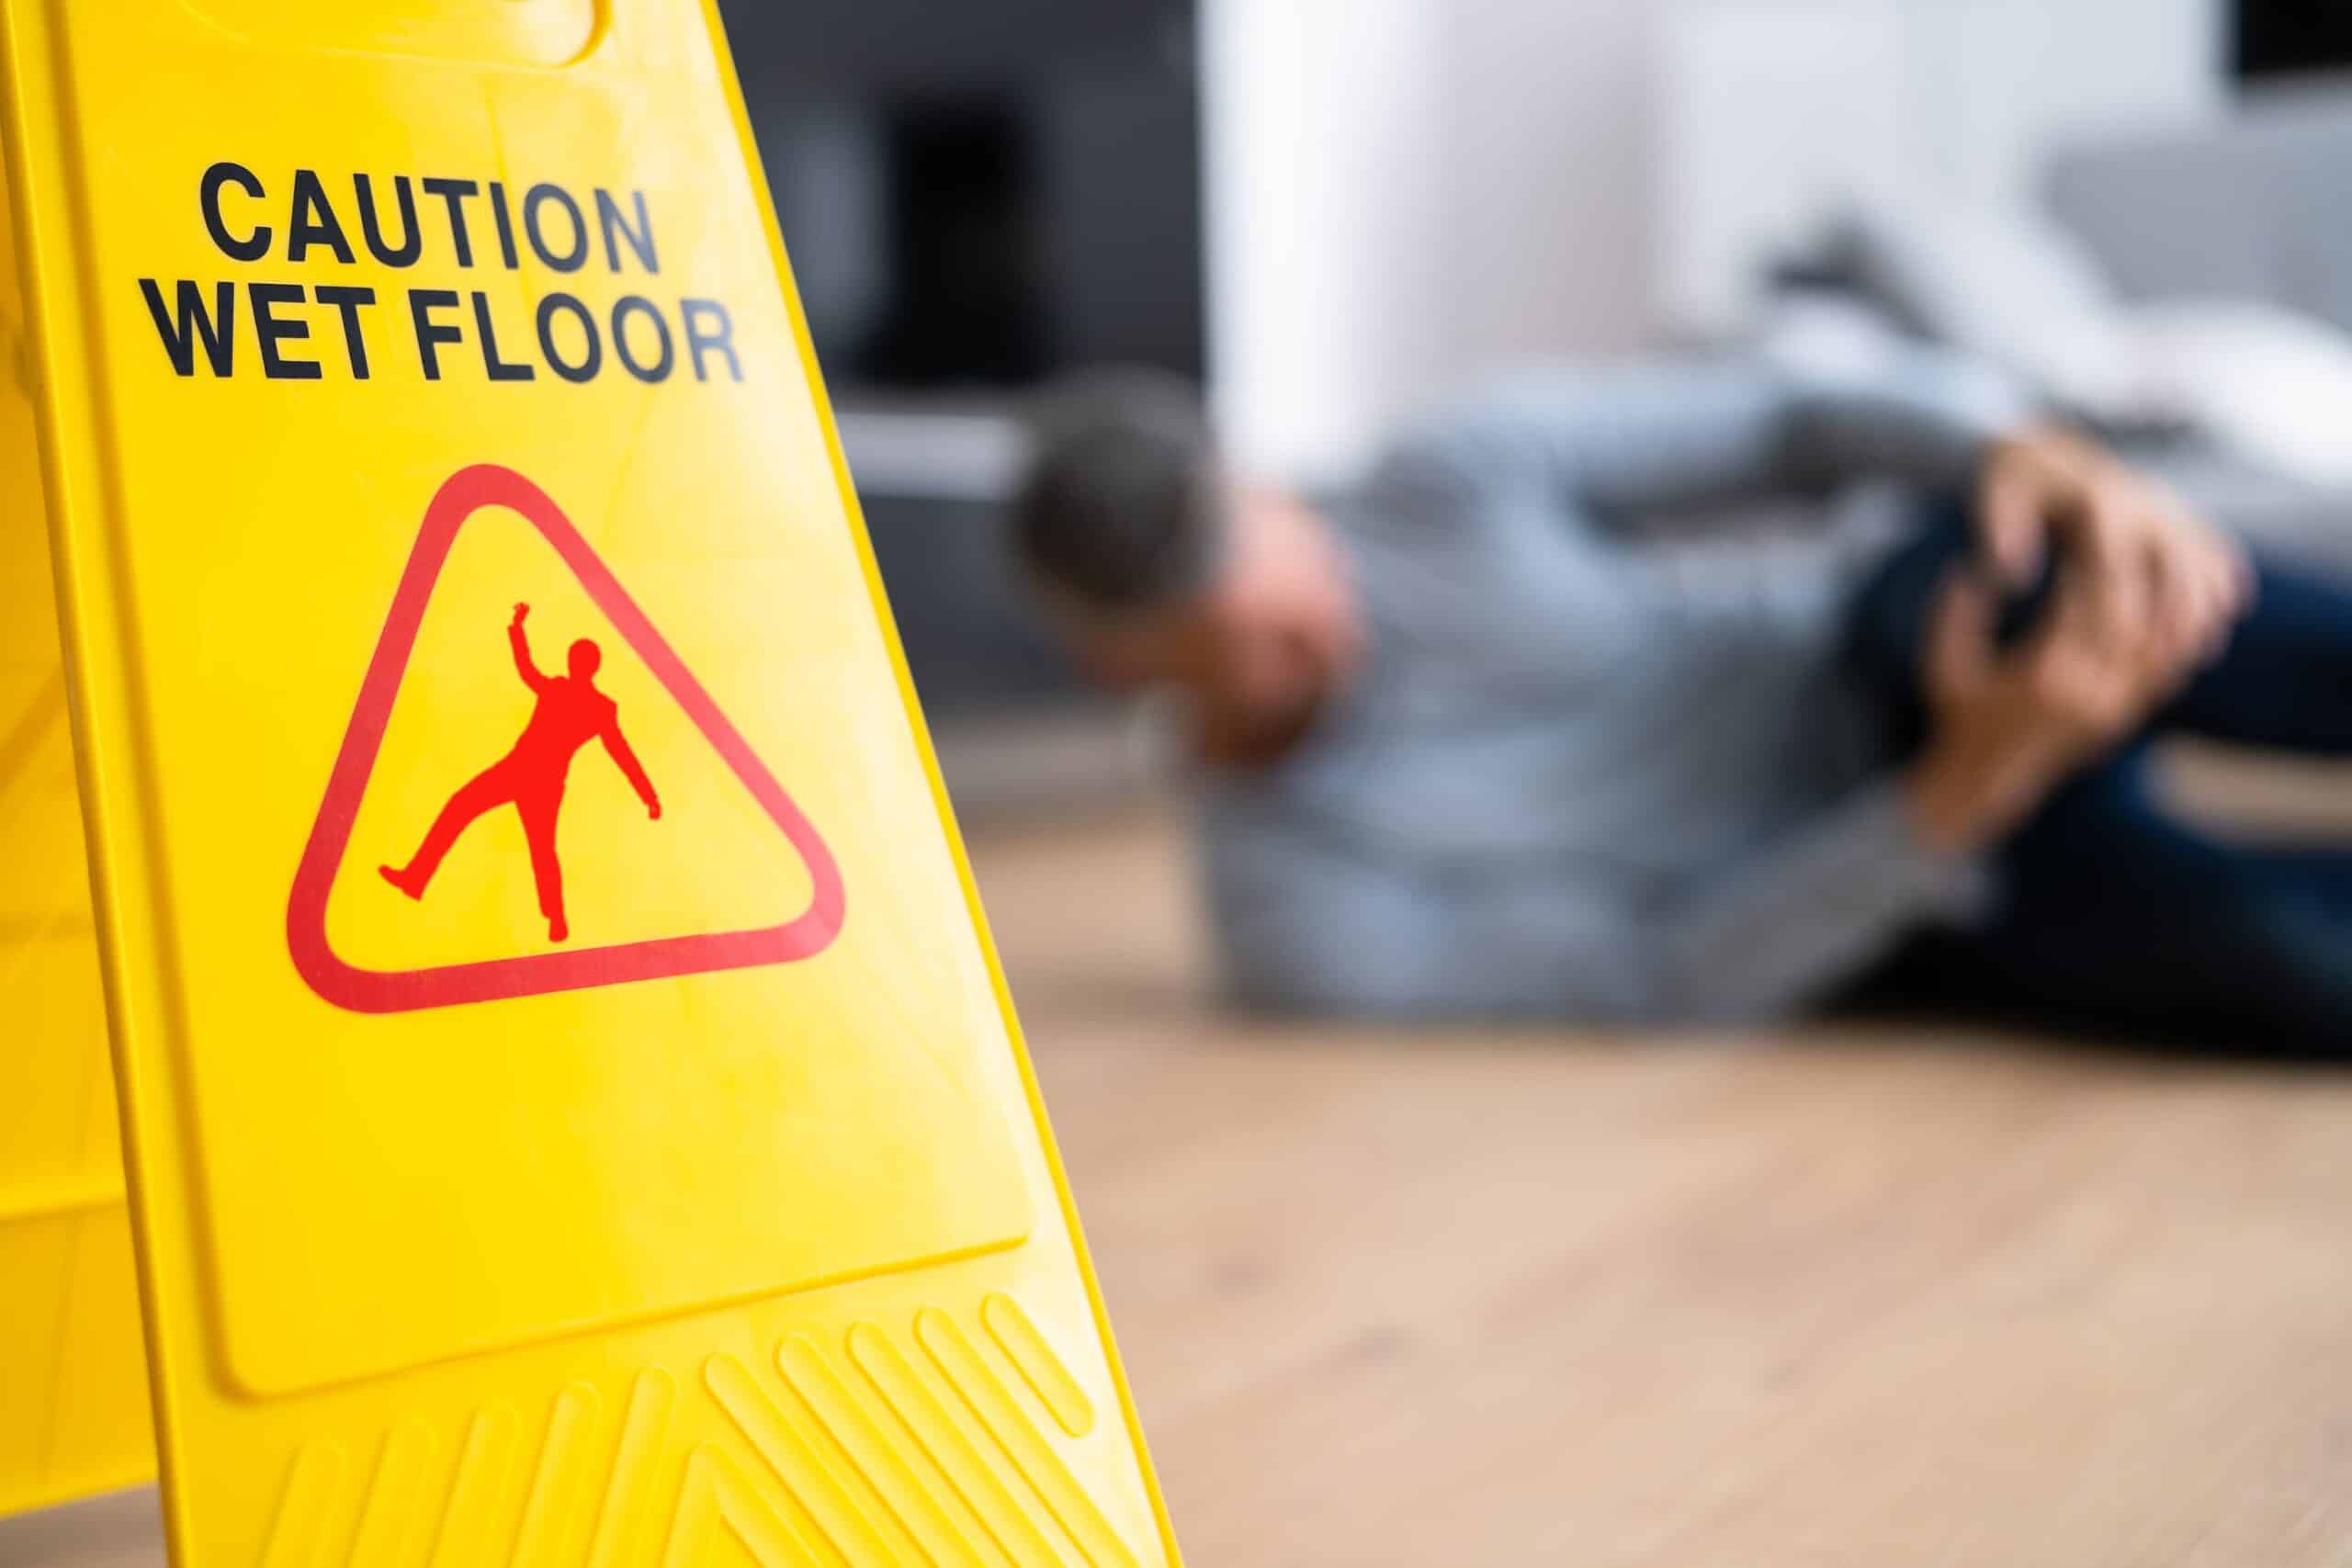 Slip and fall - Personal injury lawyer